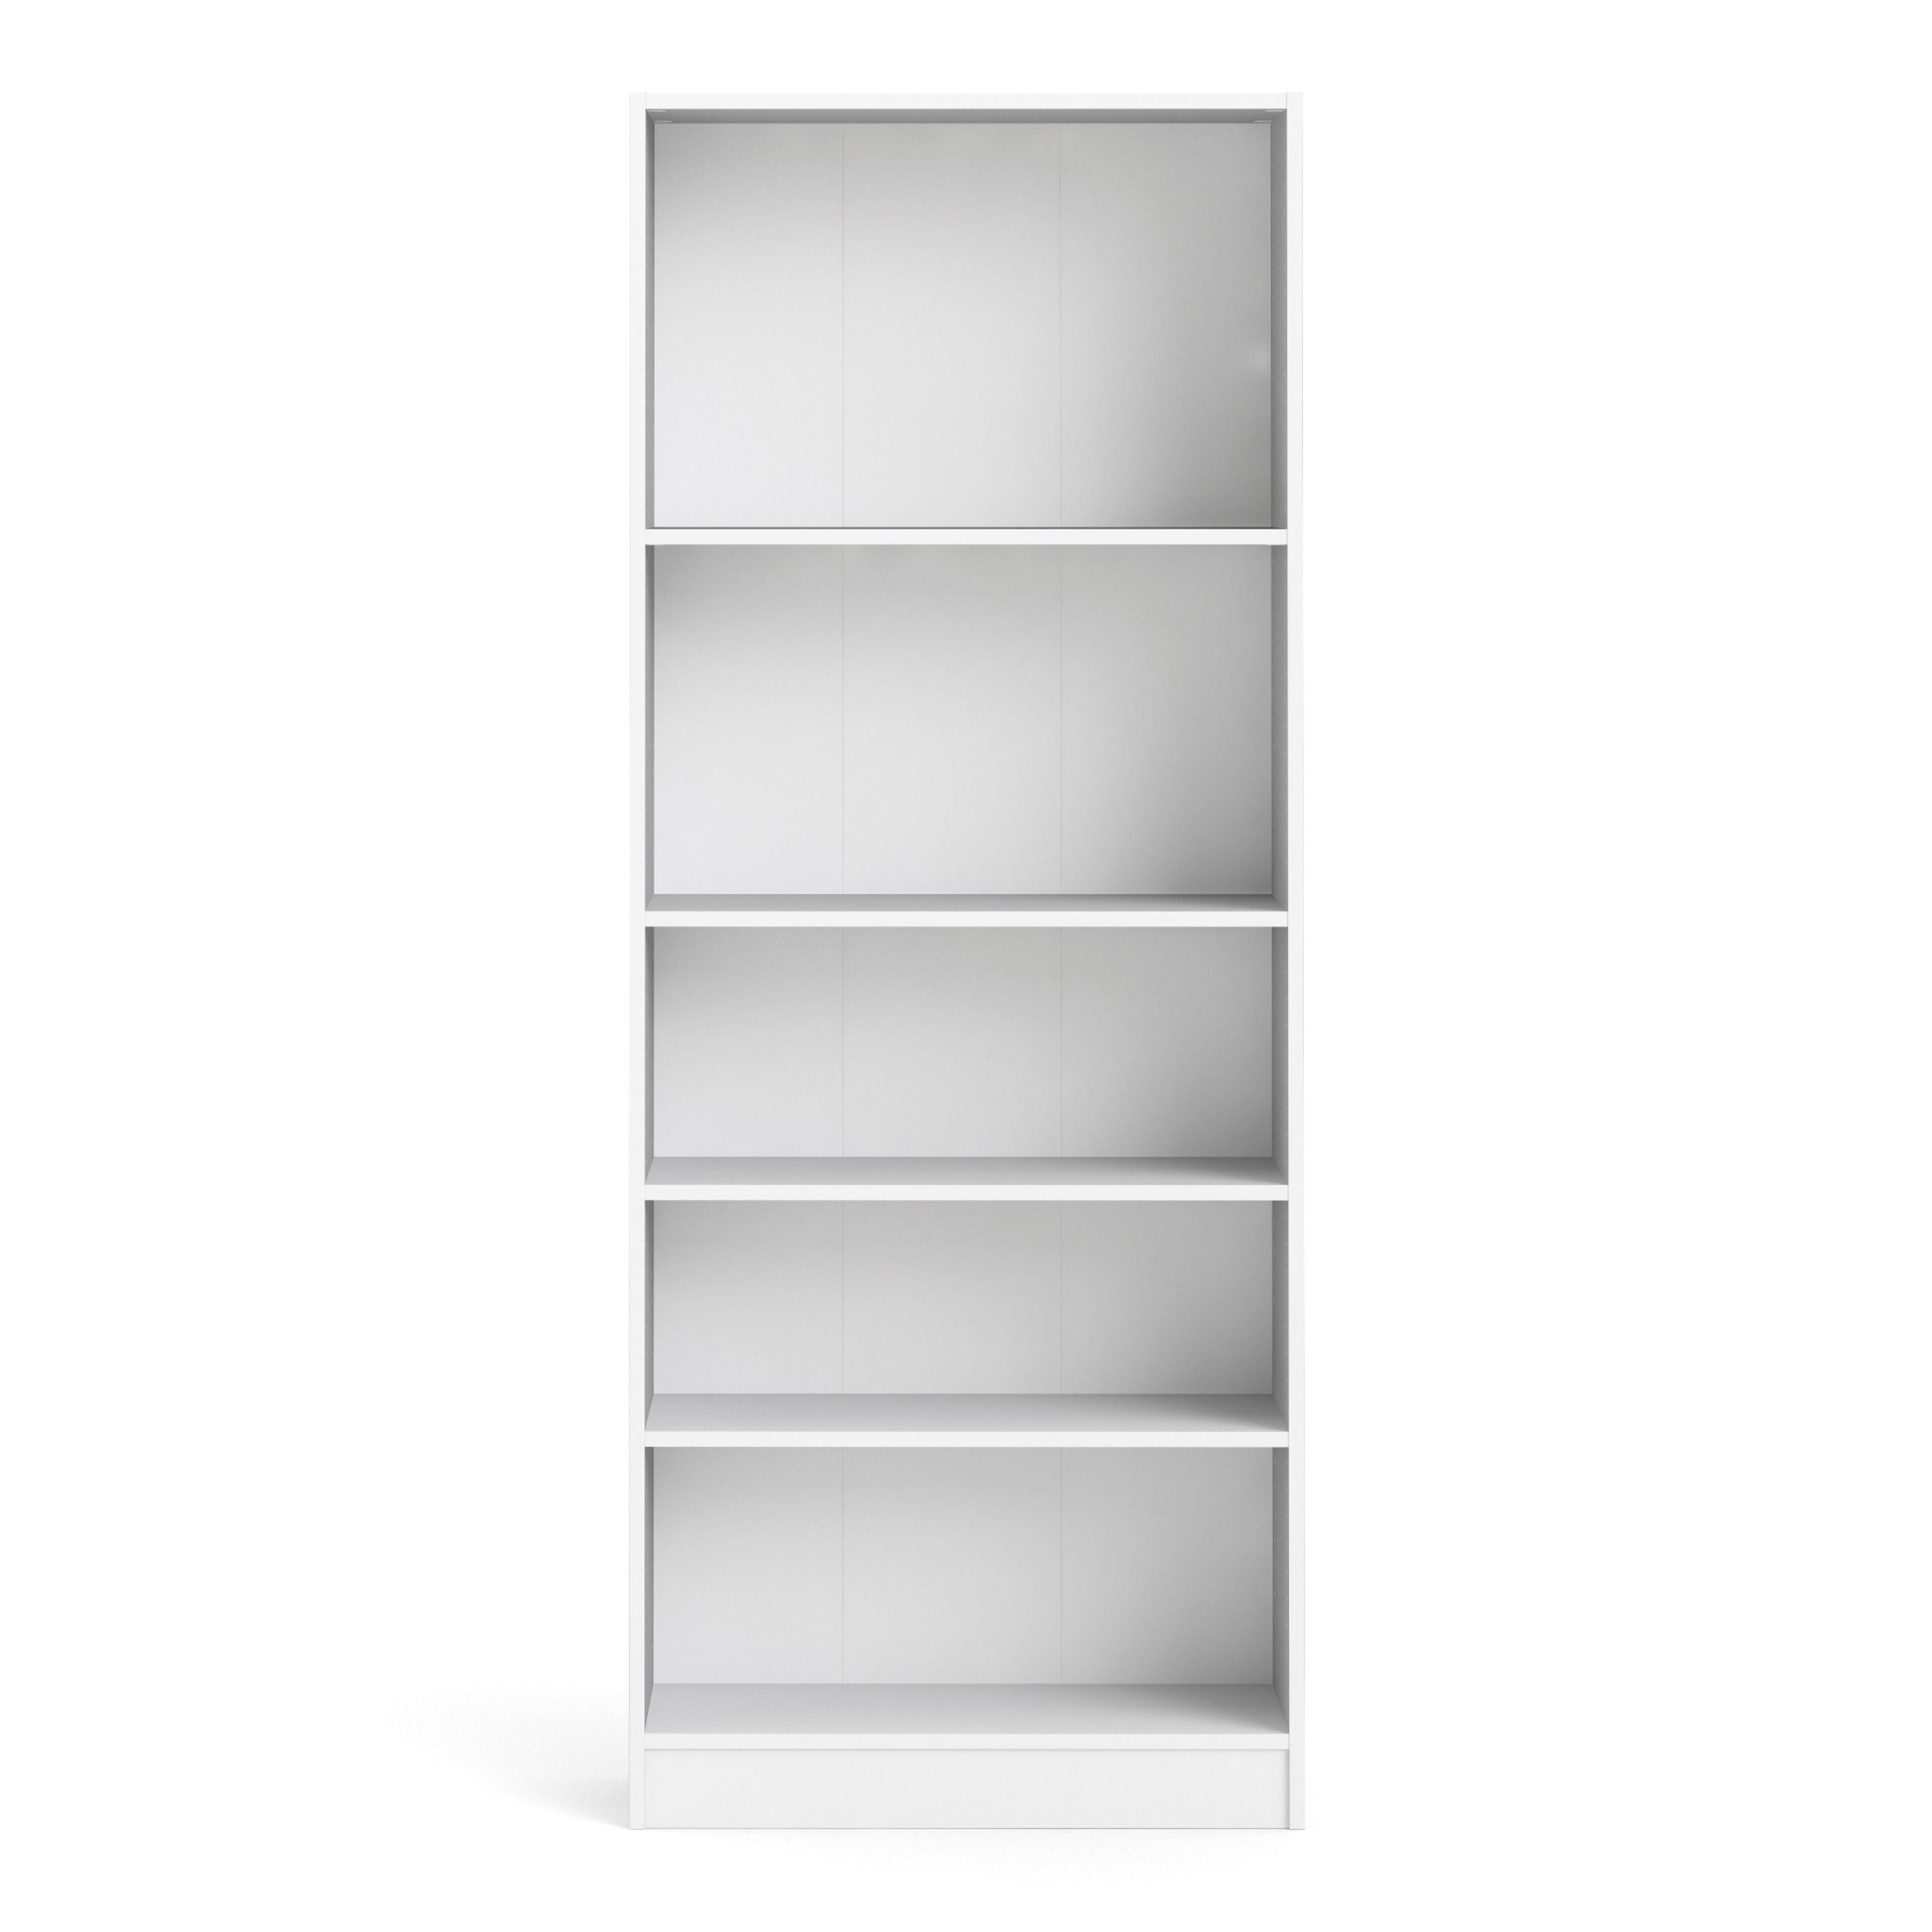 Basic Tall Wide Bookcase (4 Shelves) in White Furniture To Go Ltd